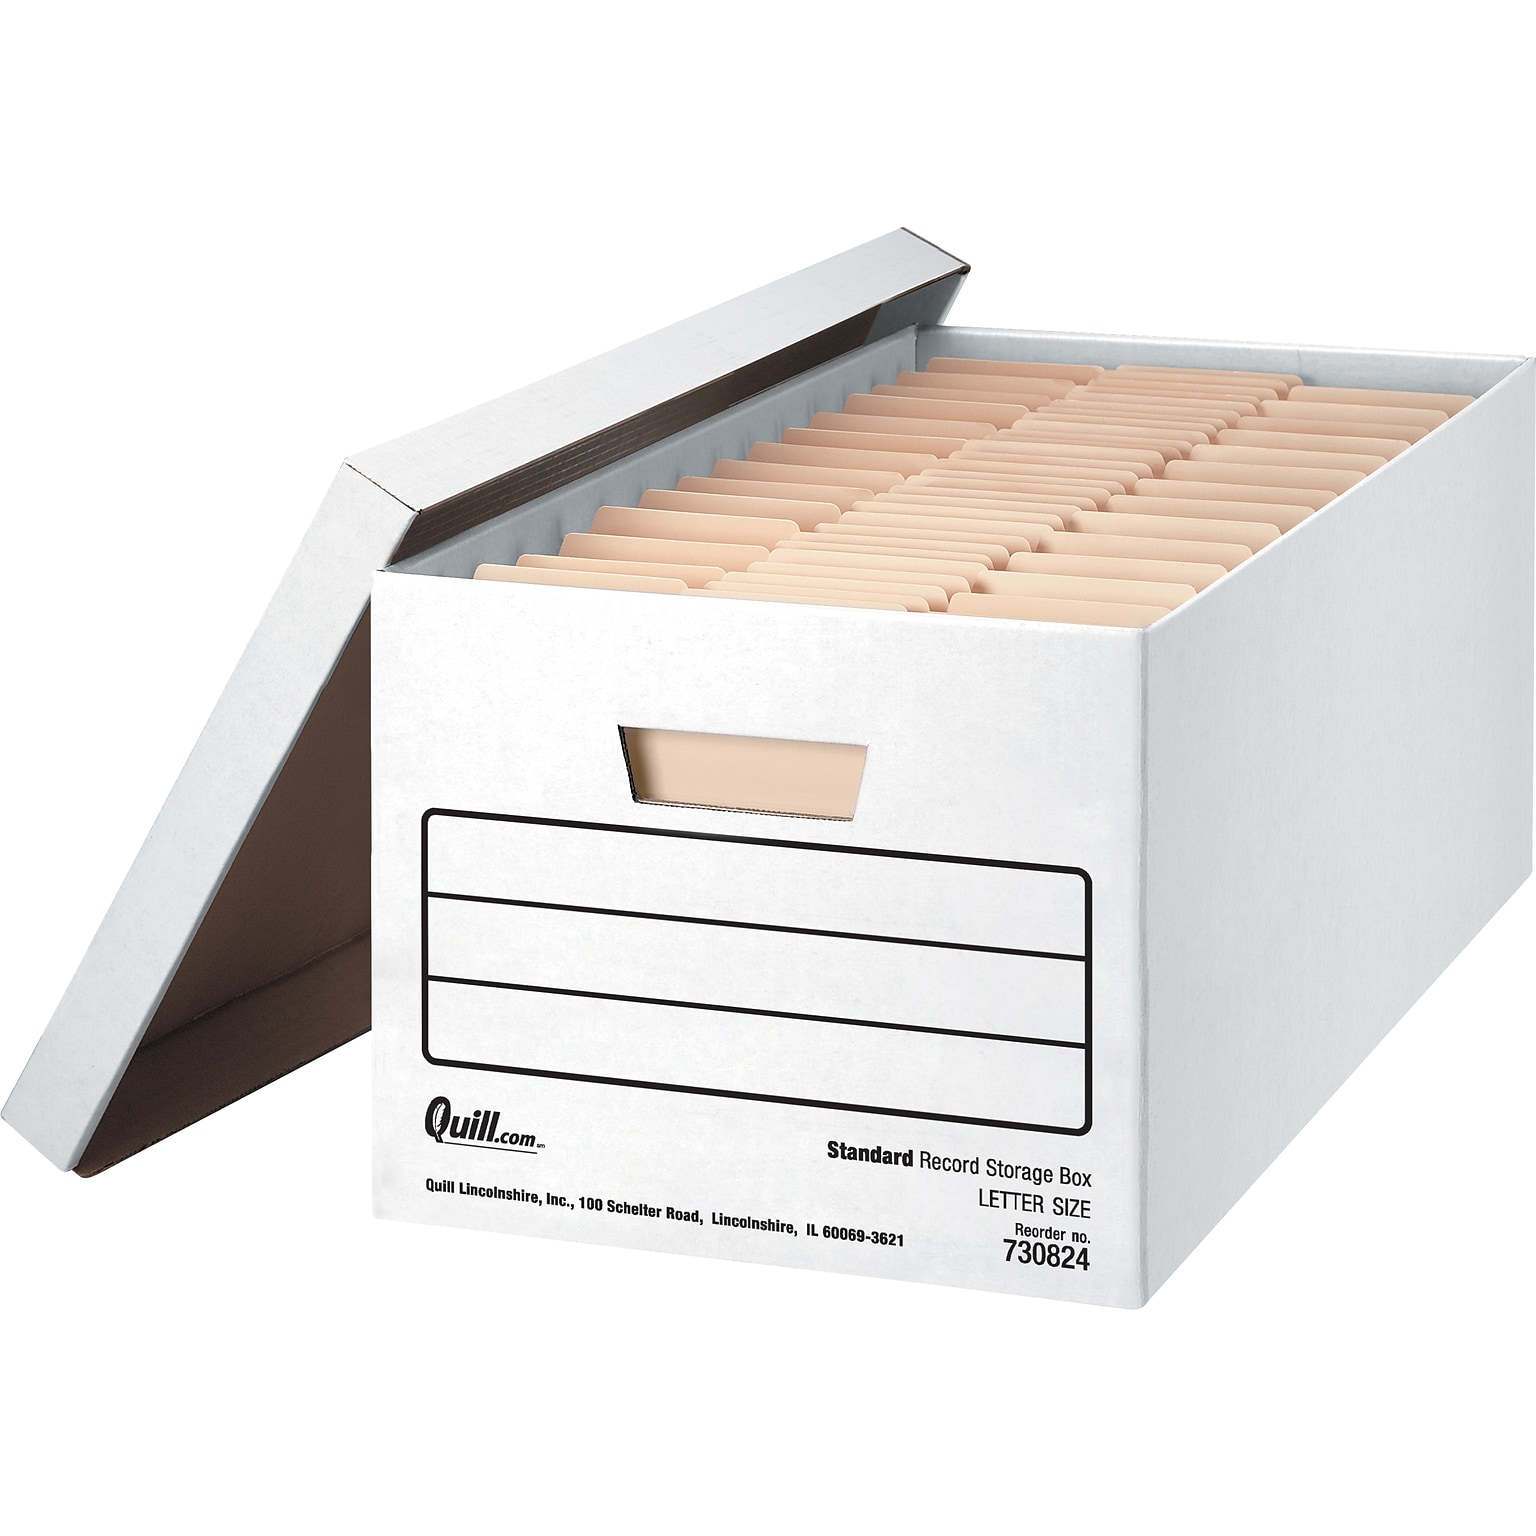 Quill Brand® 35% Recycled Corrugated Medium-Duty File Storage Boxes, Lift-Off Lid, Letter, White, 12/Carton (30824)